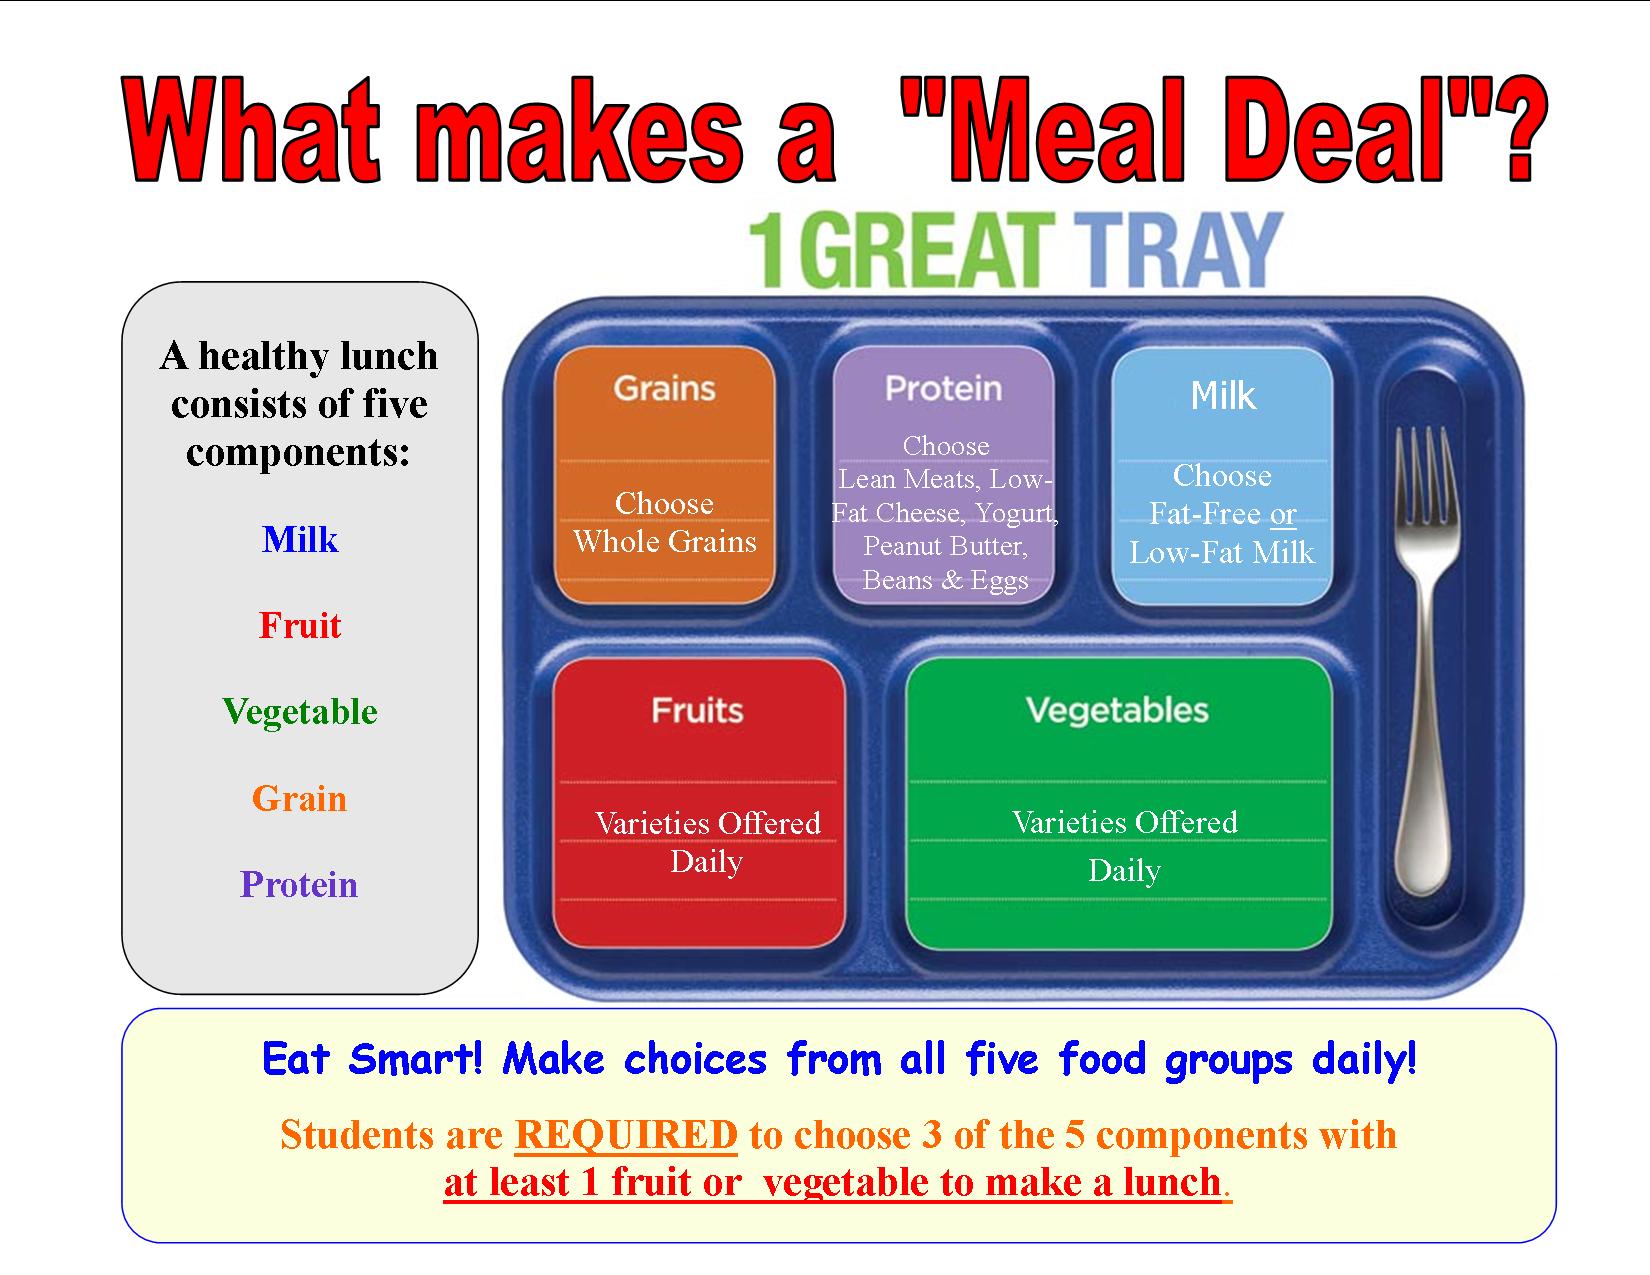 USDA School Lunch Nutritional Guidelines